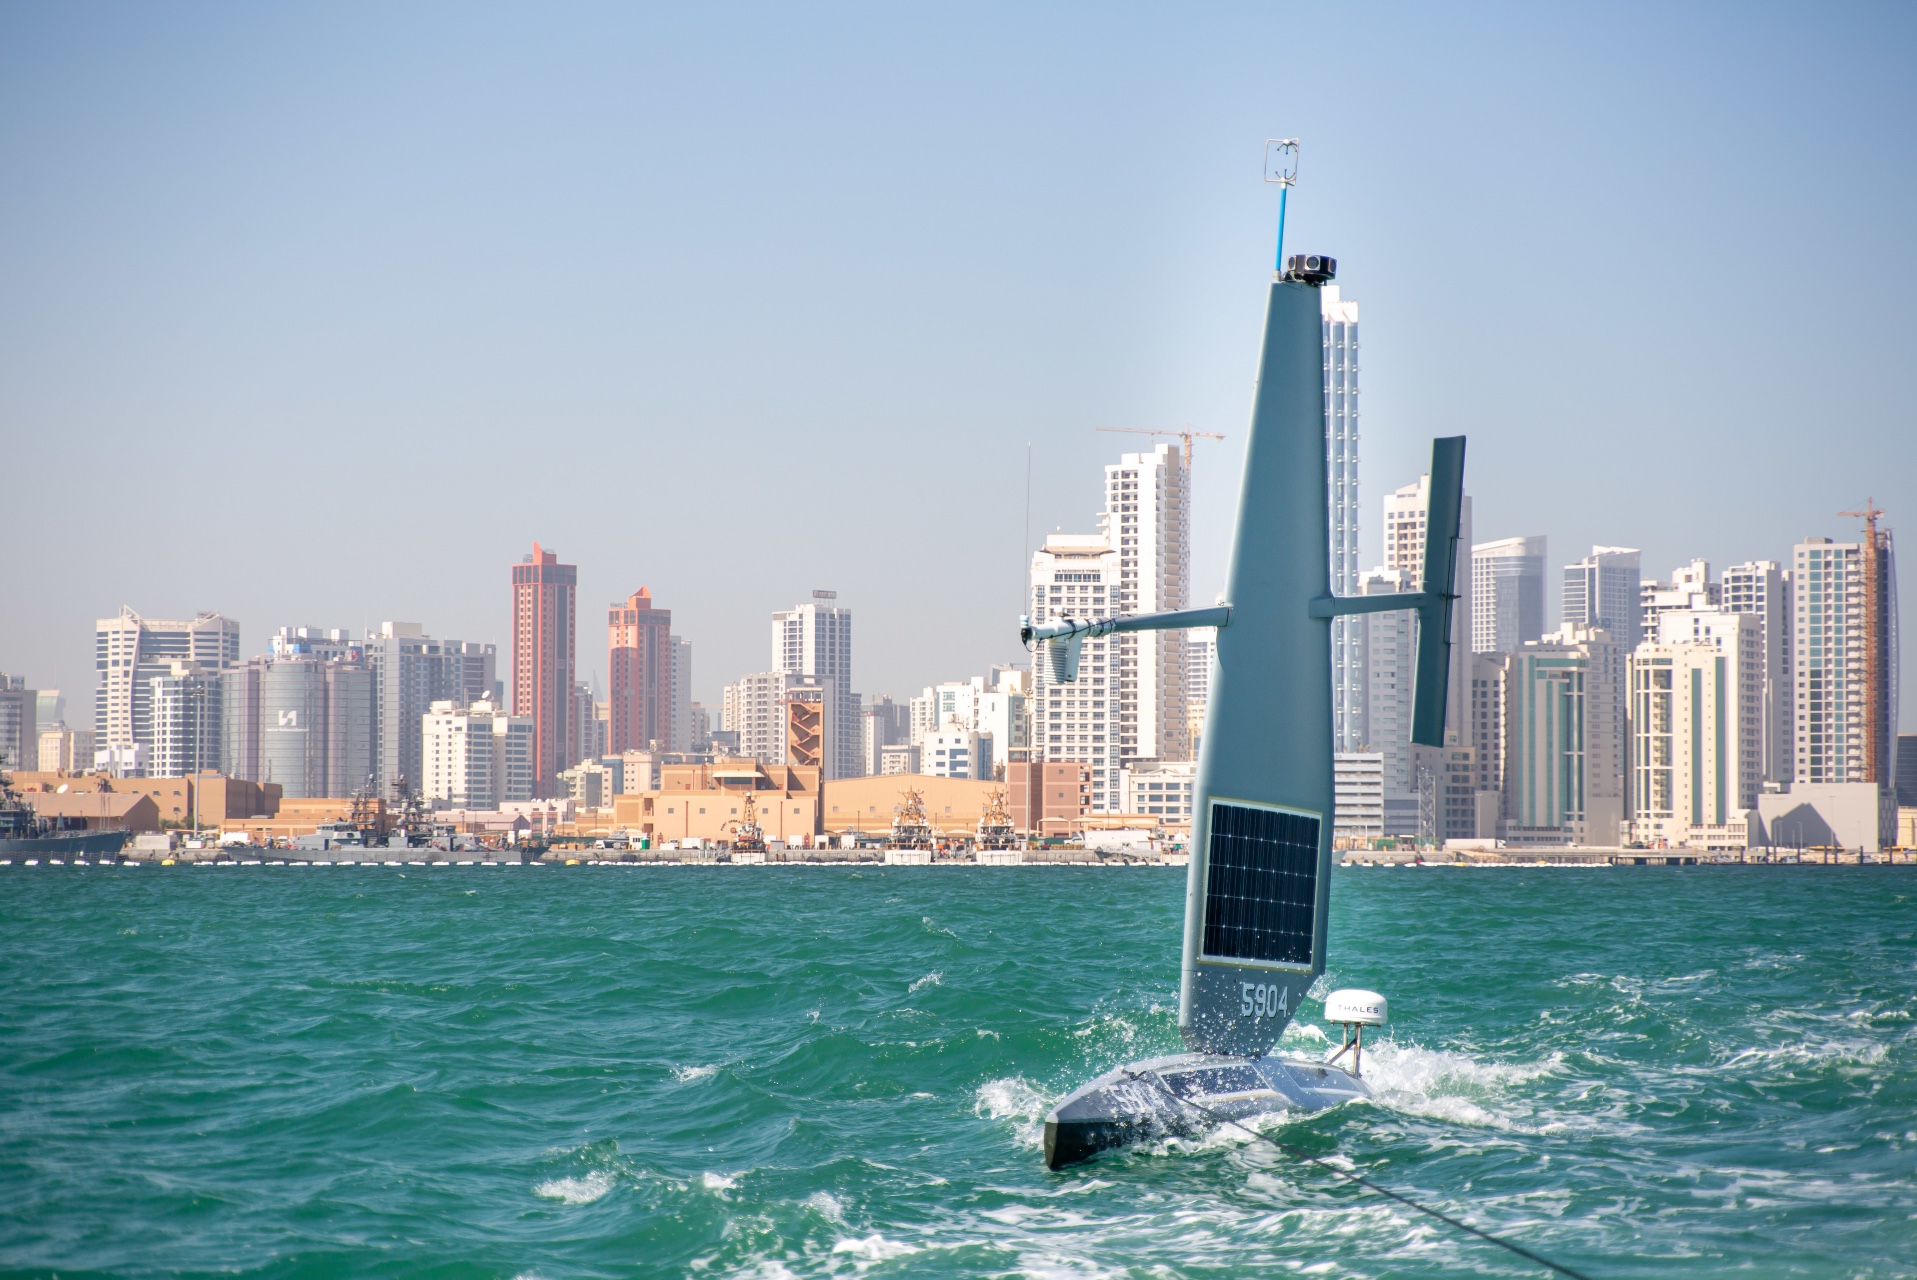 A Saildrone Explorer unmanned surface vessel (USV) is being towed out to sea in the Arabian Gulf off Bahrain’s coast